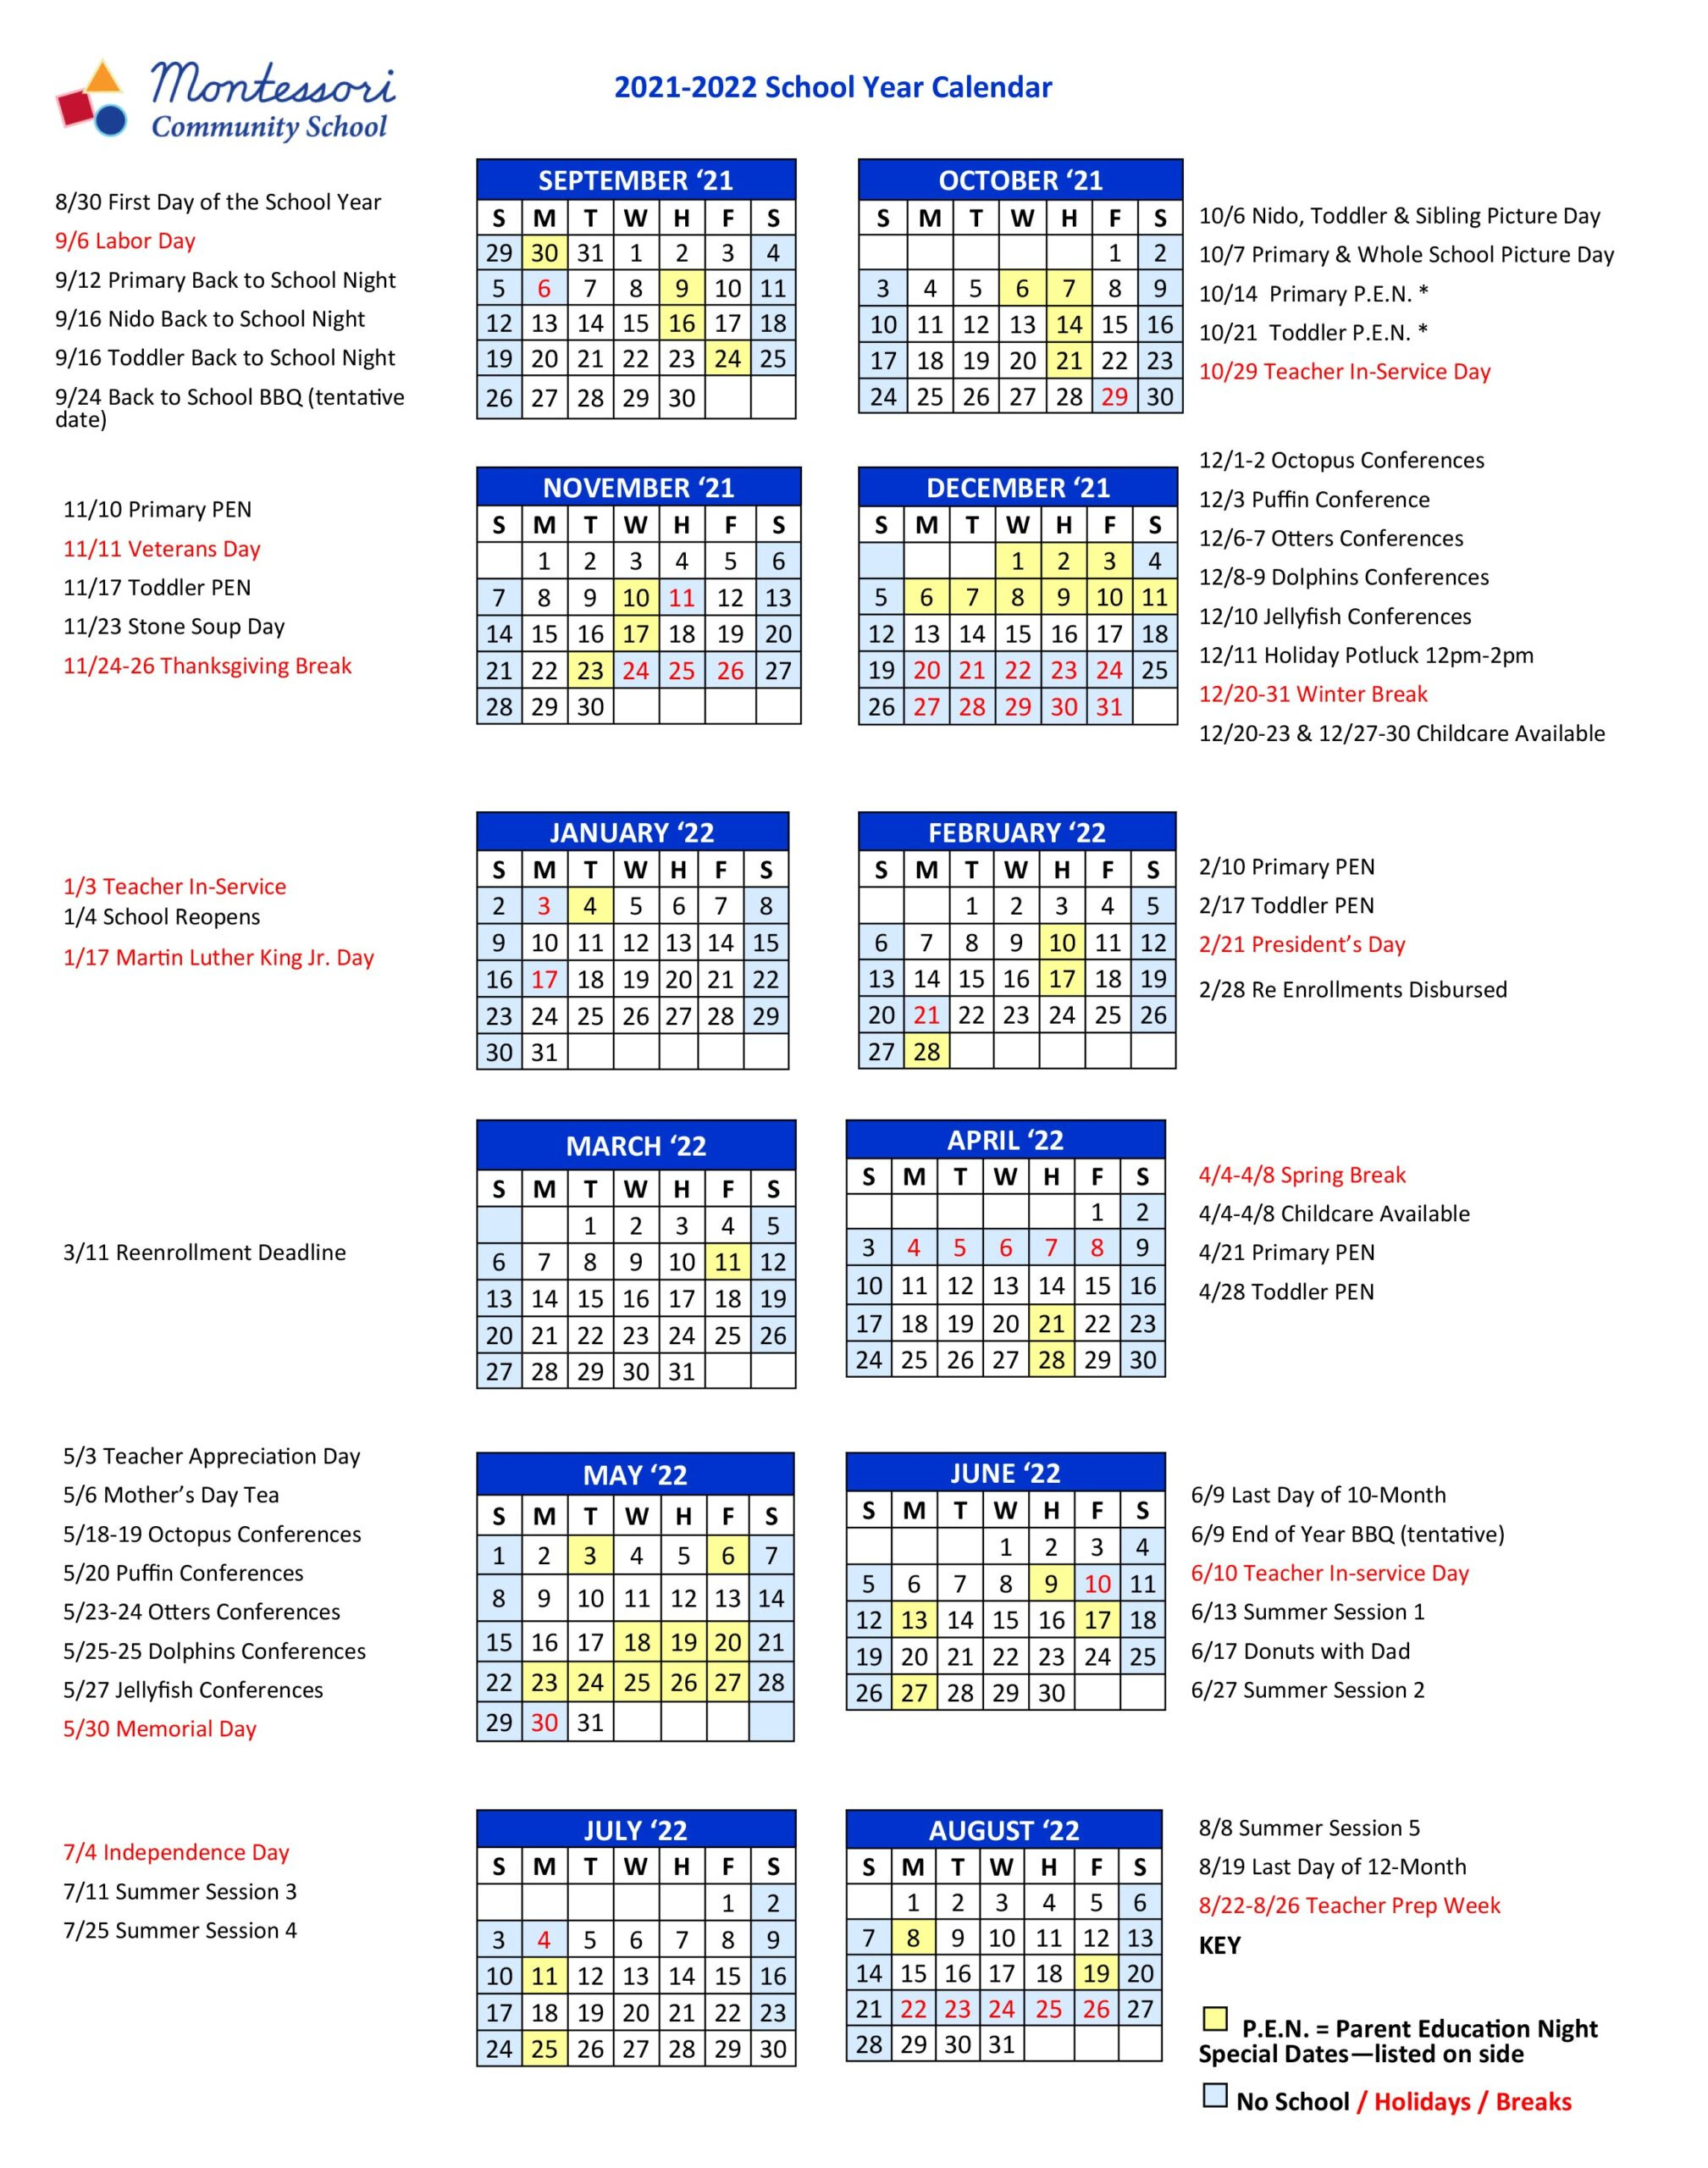 Kindercare Holiday Schedule 2022 Kindercare Holiday Schedule 2022 - Festival Schedule 2022